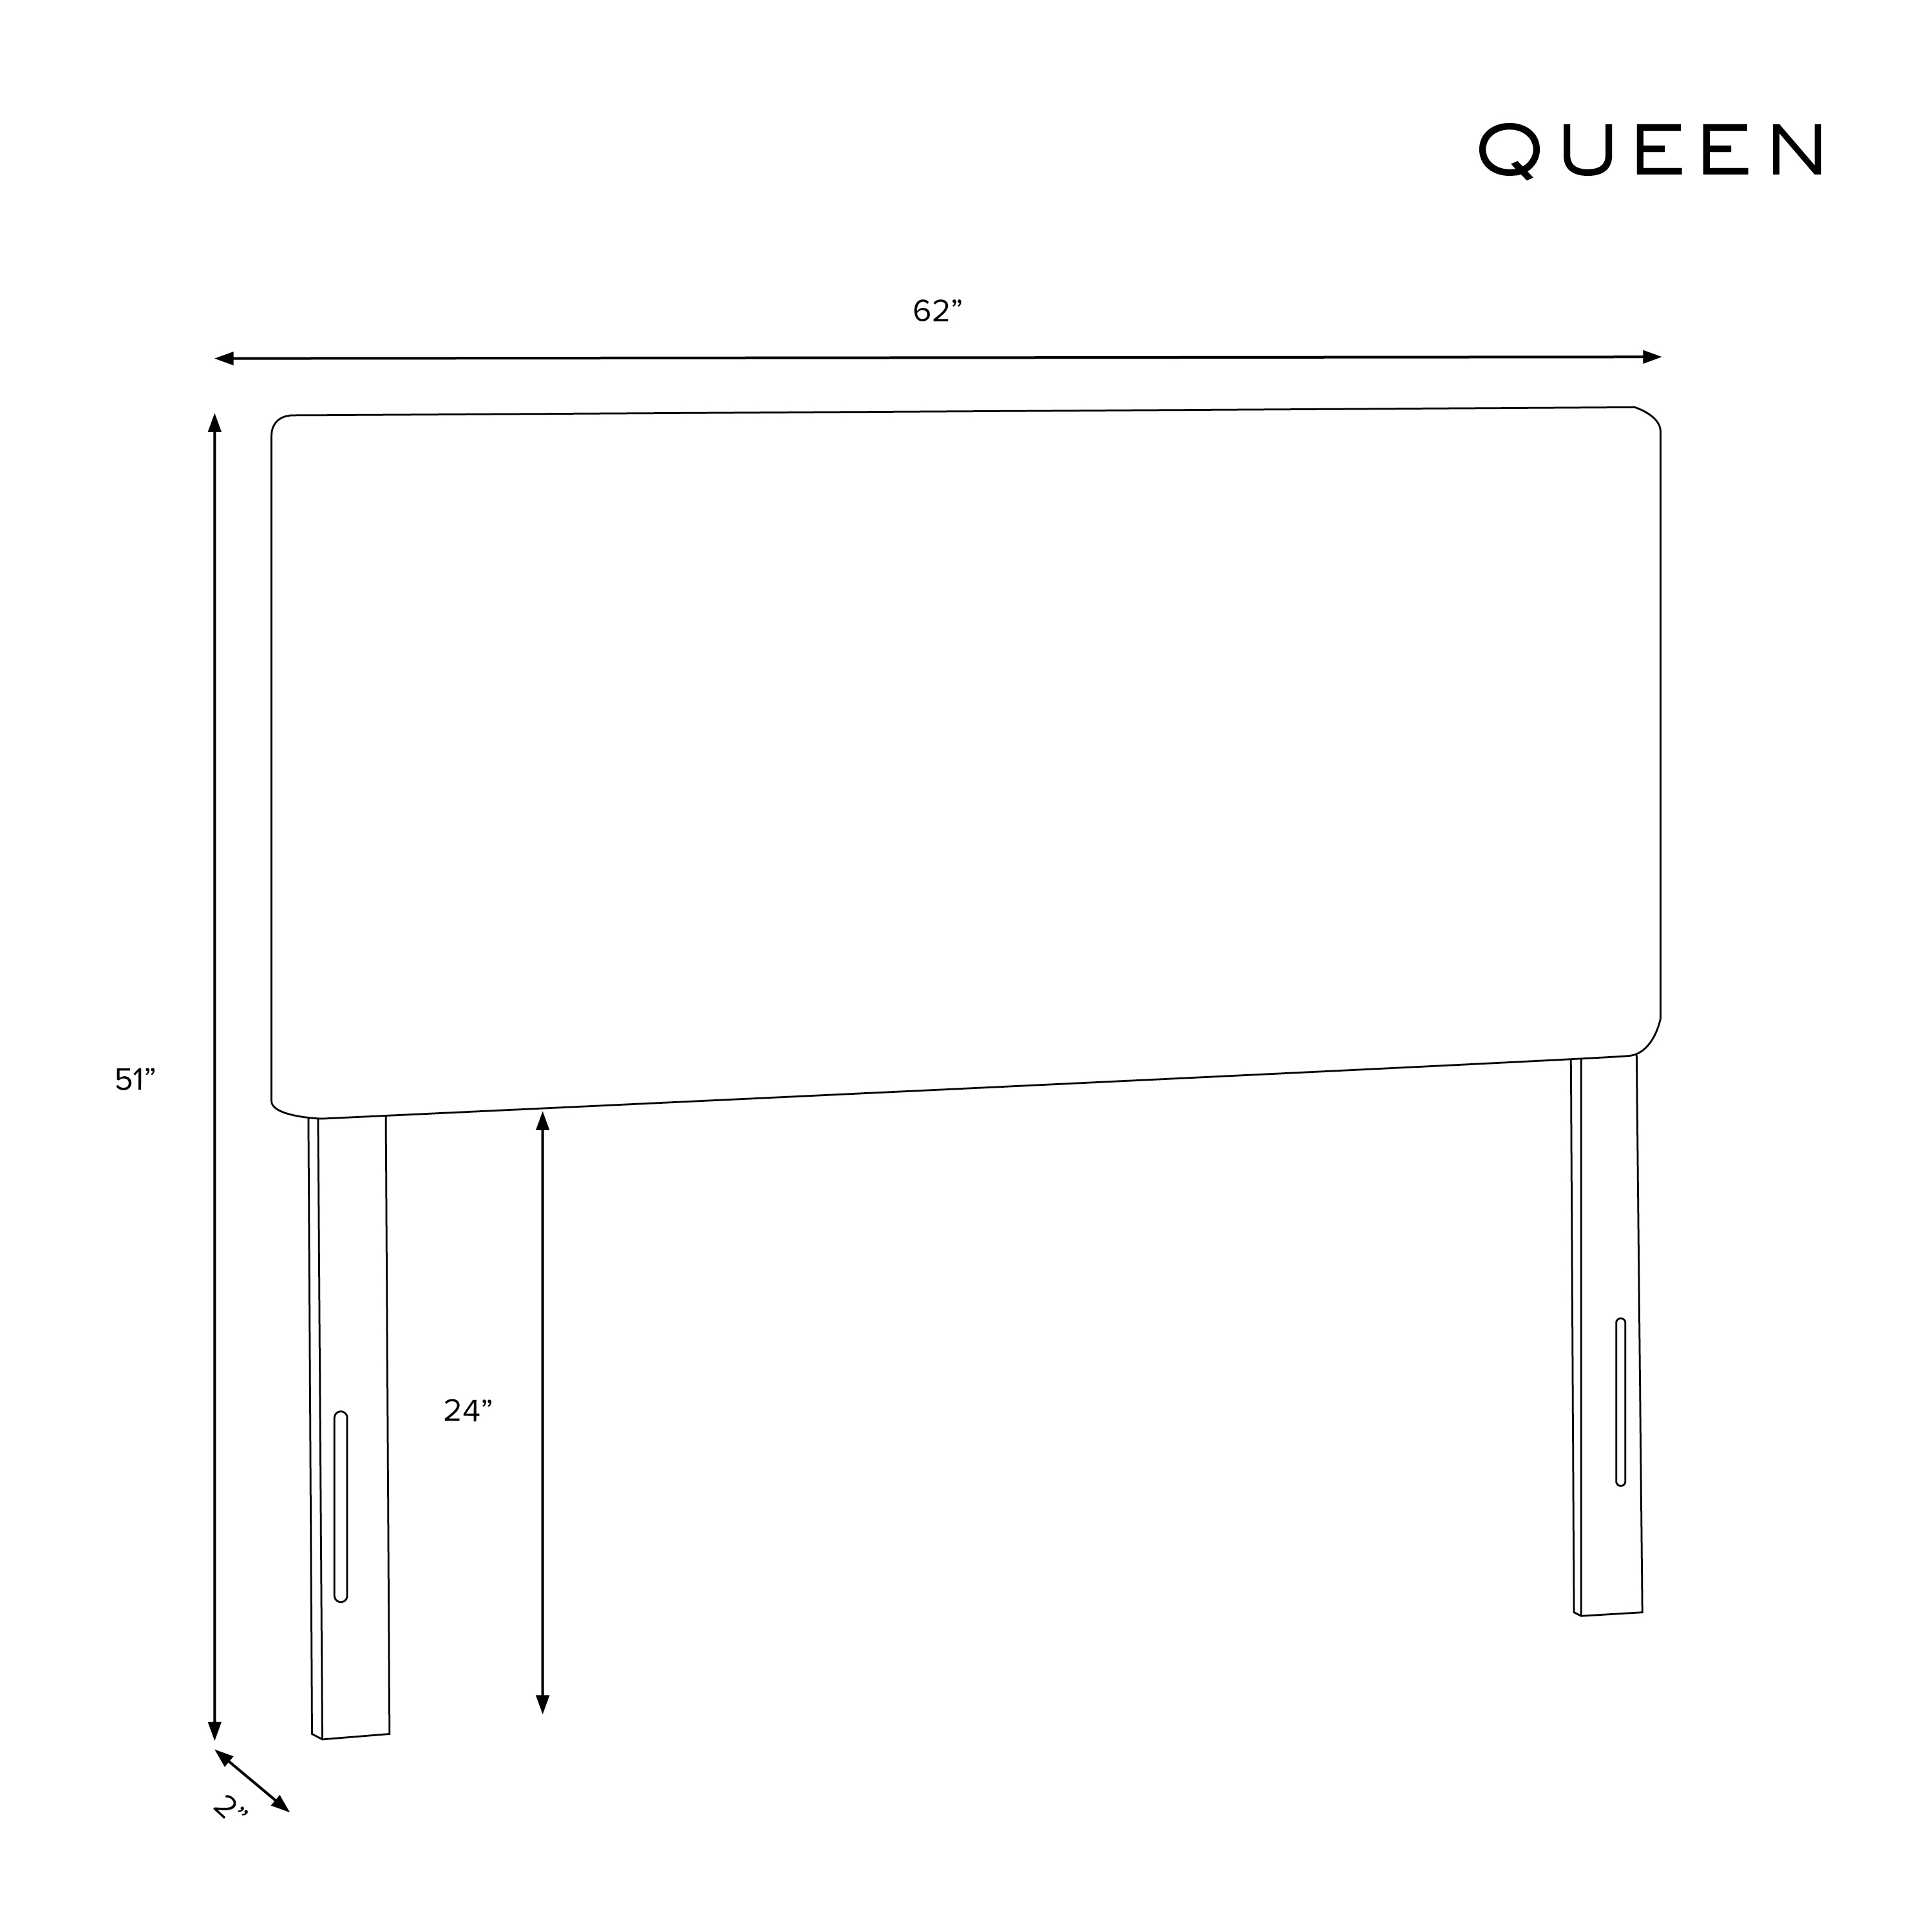 Queen Kimball Headboard, Pewter Nailheads - Image 5